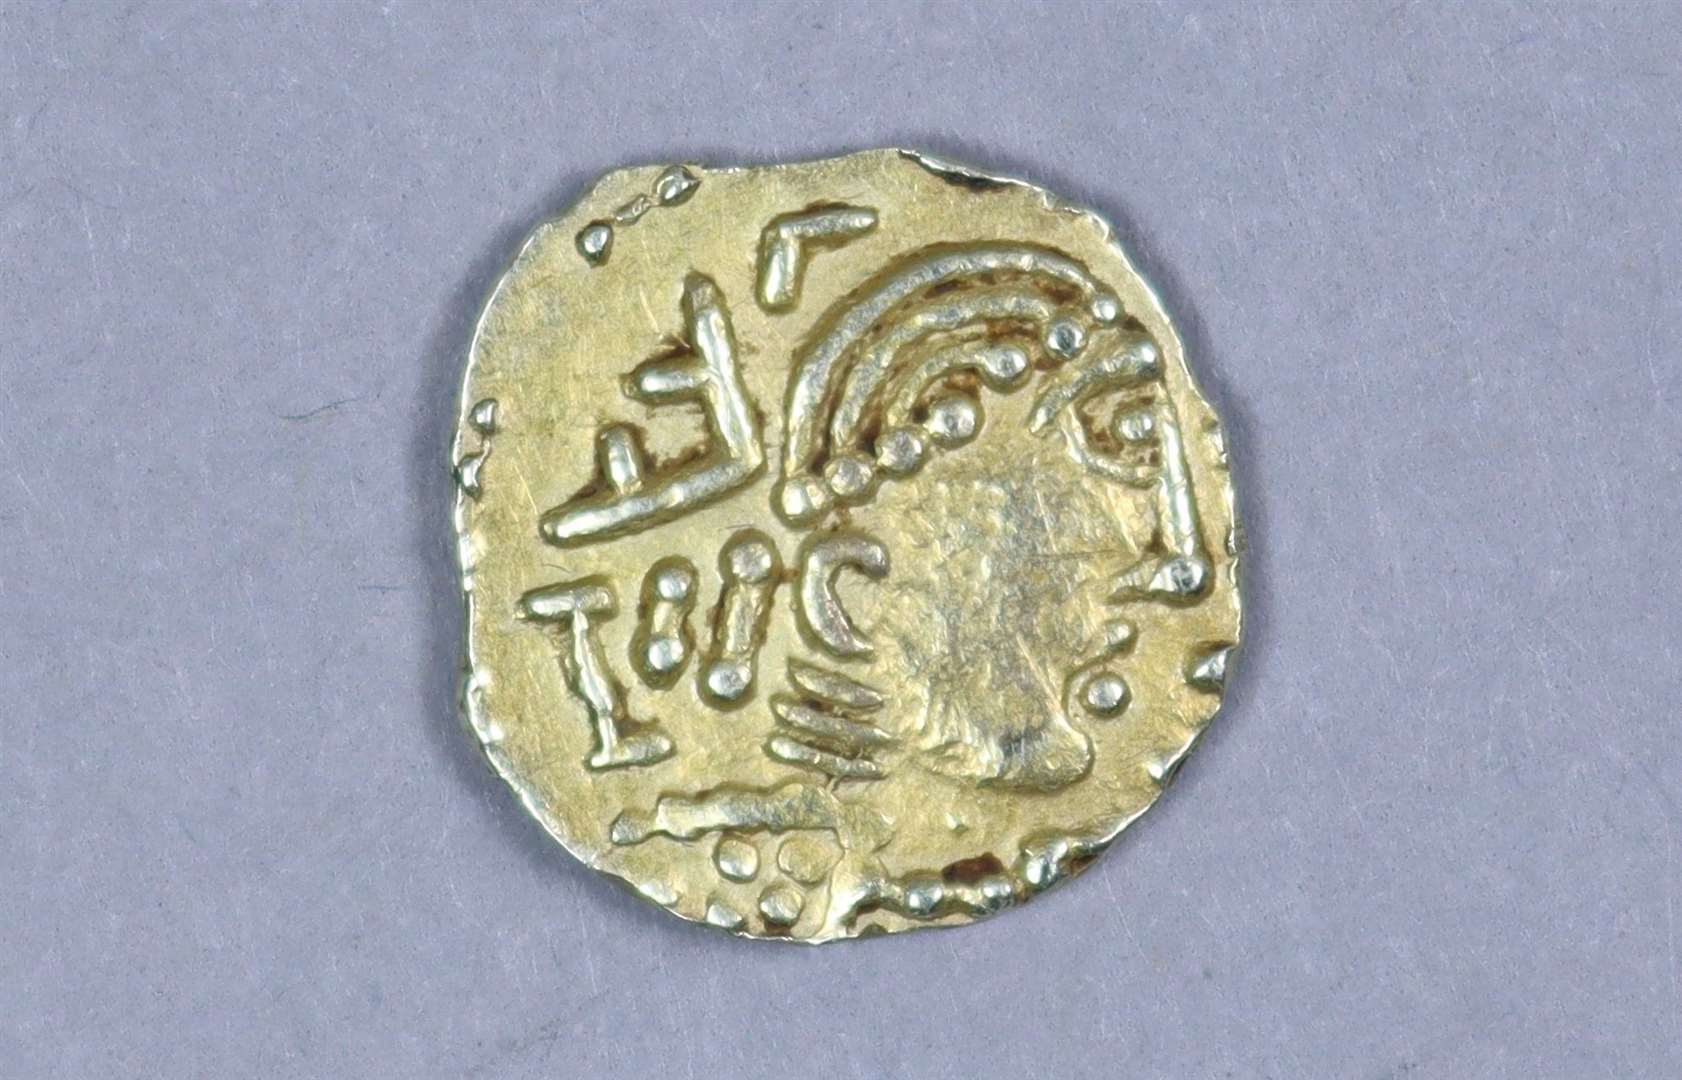 A gold shilling depicting the emperor with a diademed bust is estimated at 8,000 to 10,000 pounds